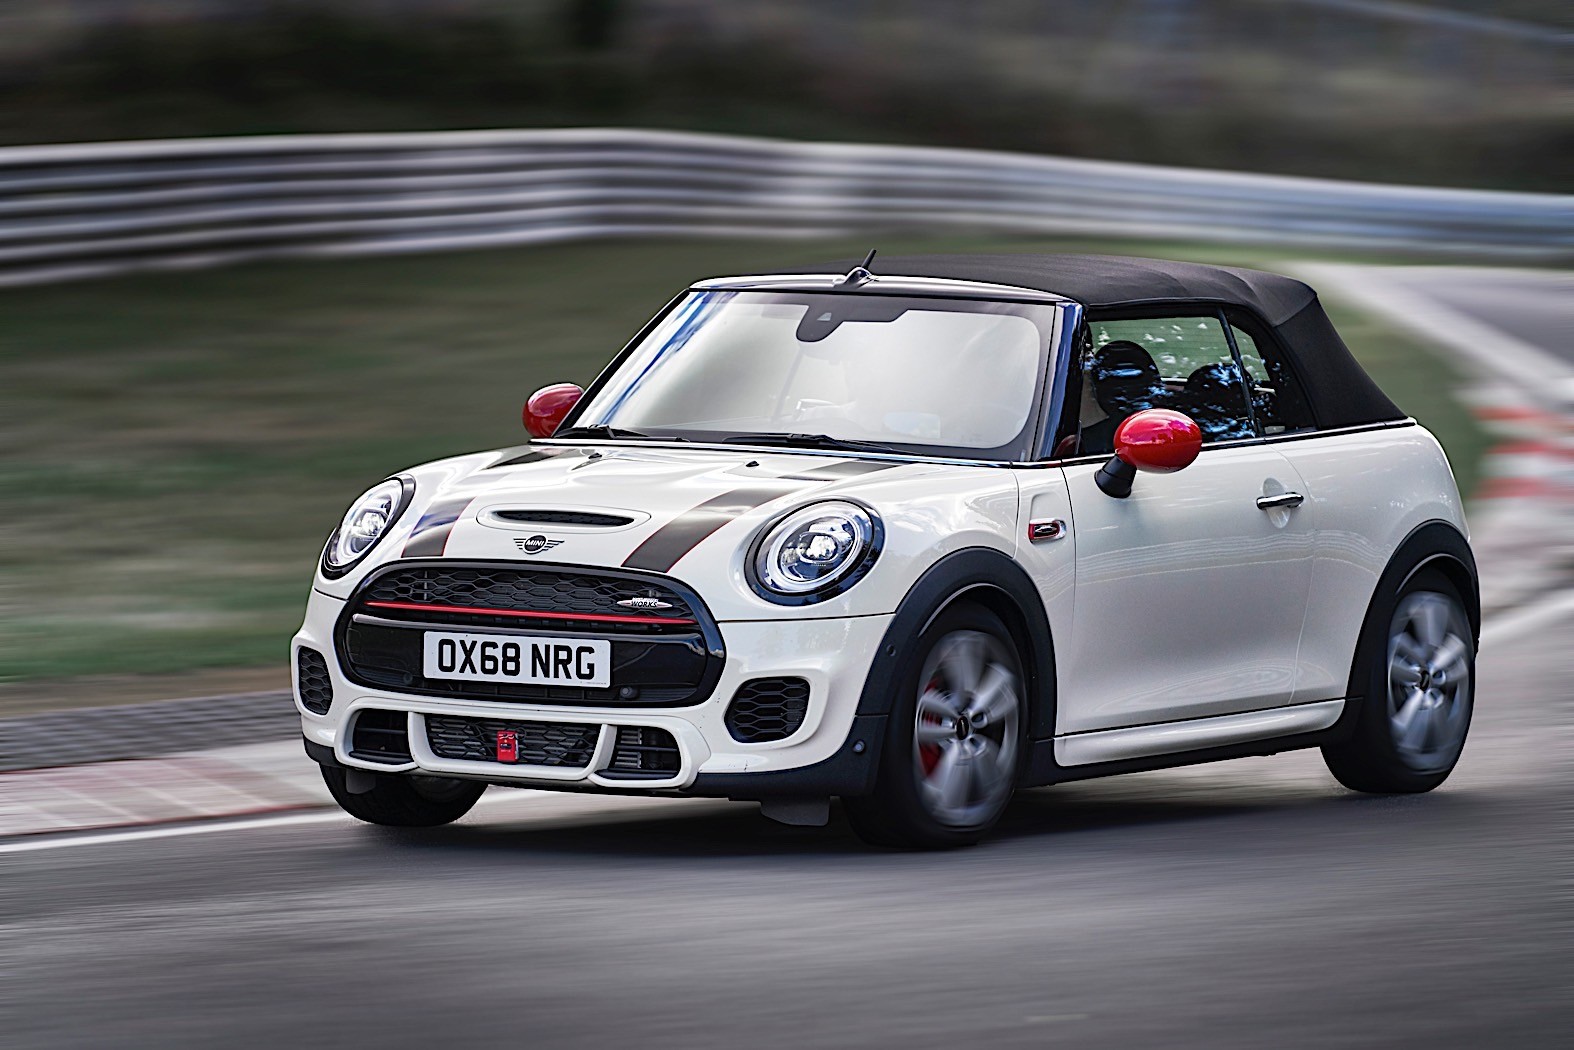 MINI John Cooper Works Comes Back as Euro 6d-TEMP Compliant Car from ...